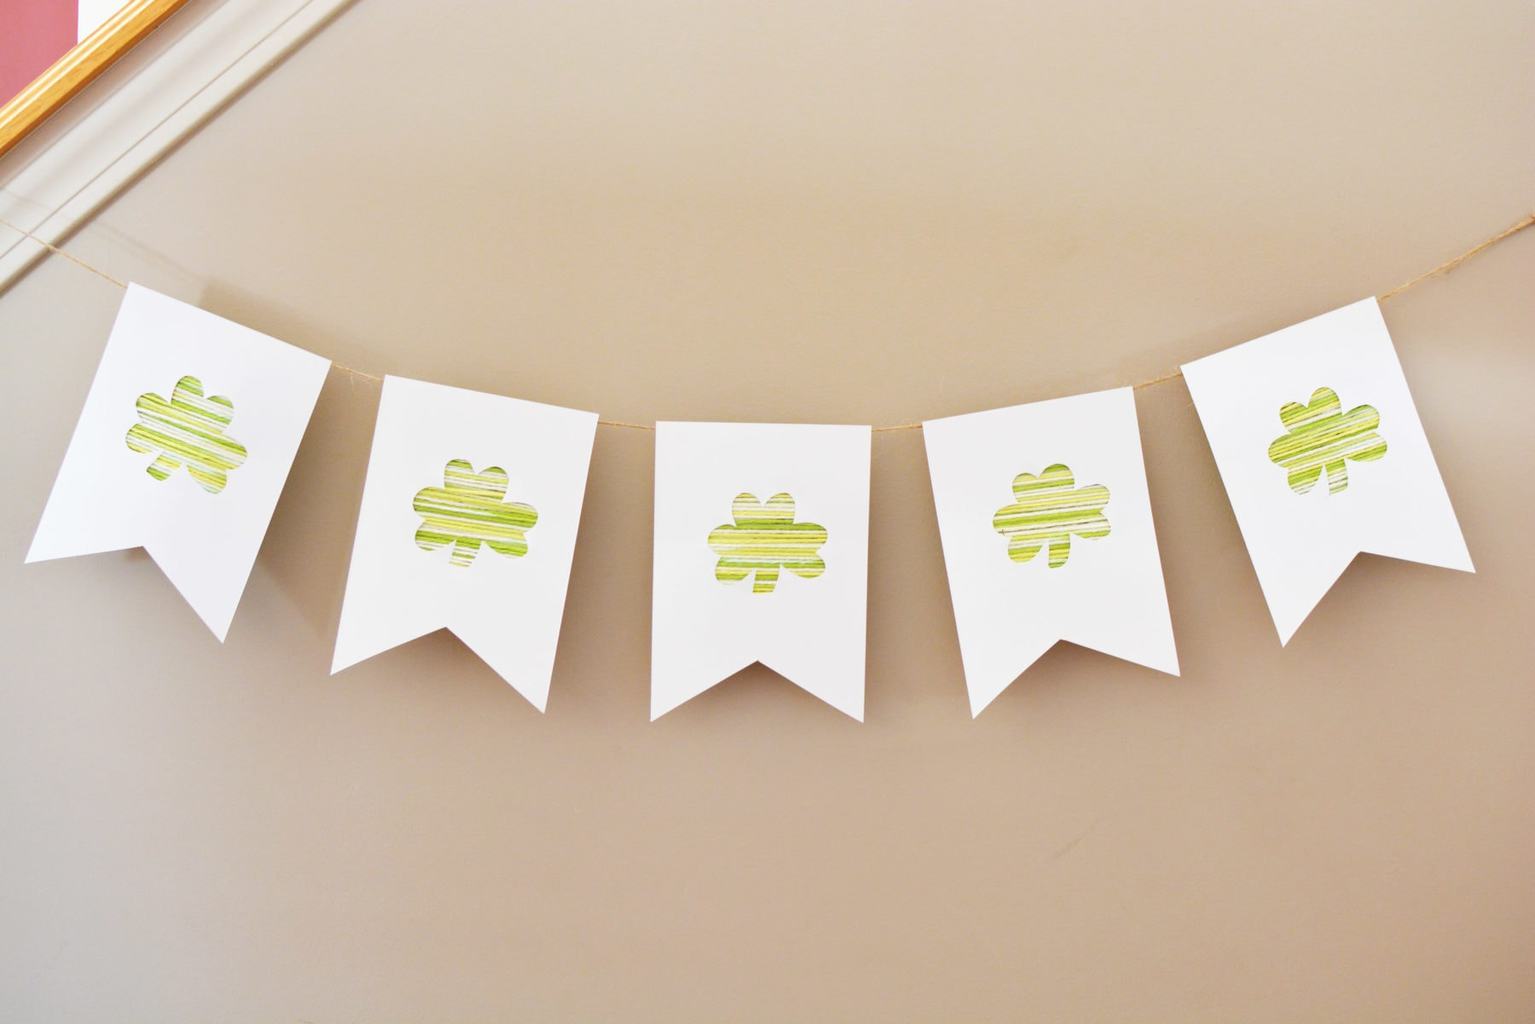 Are you ready for something incredibly cute for St. Patrick’s Day? This DIY St. Patrick’s Day Banner and Homemade Bunting is super easy to make. It doesn’t take many supplies to make this craft, but it’s a whole lot of fun.